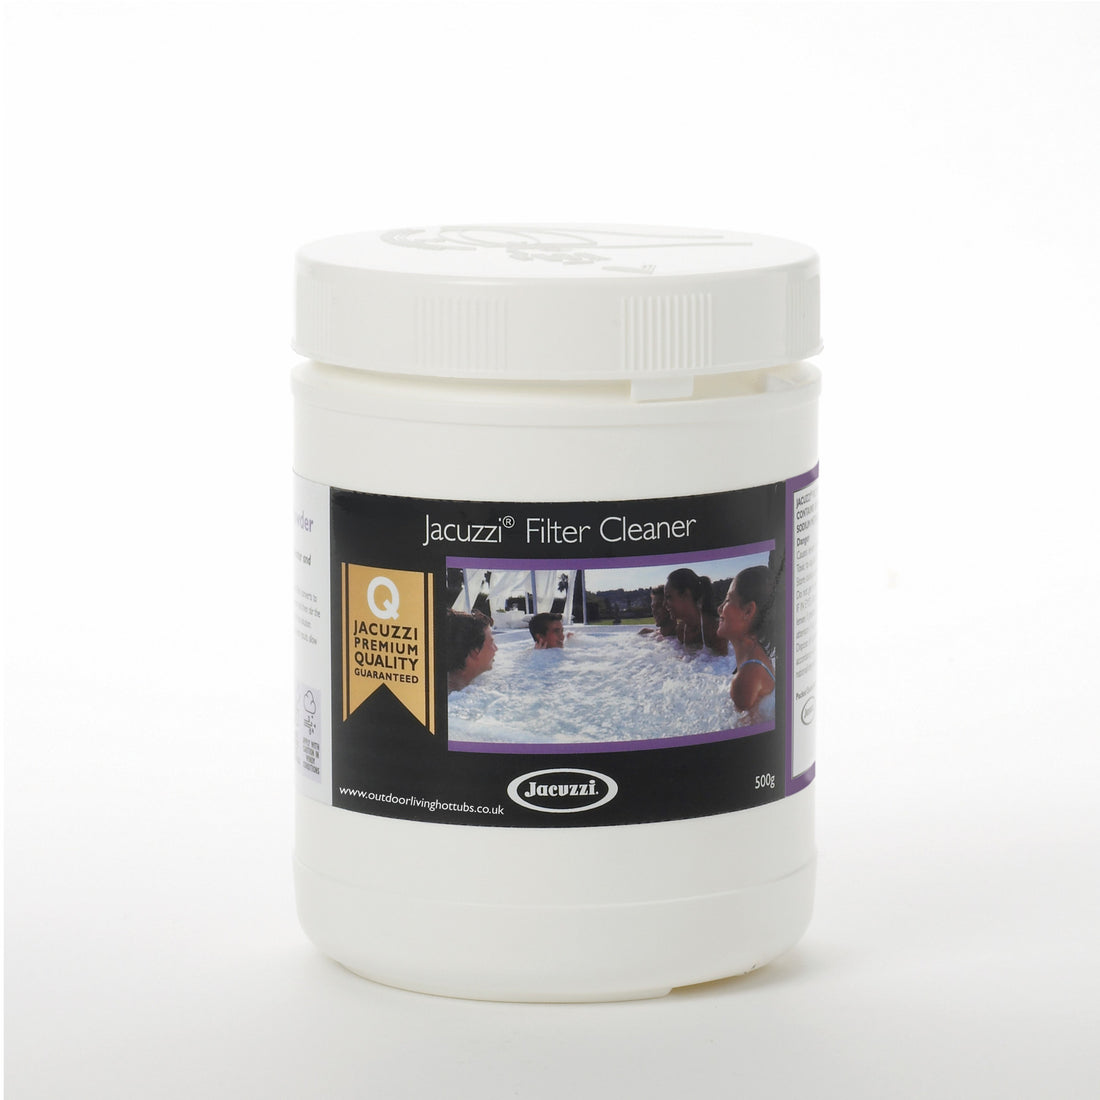 Jacuzzi Filter Cleaner - 500g